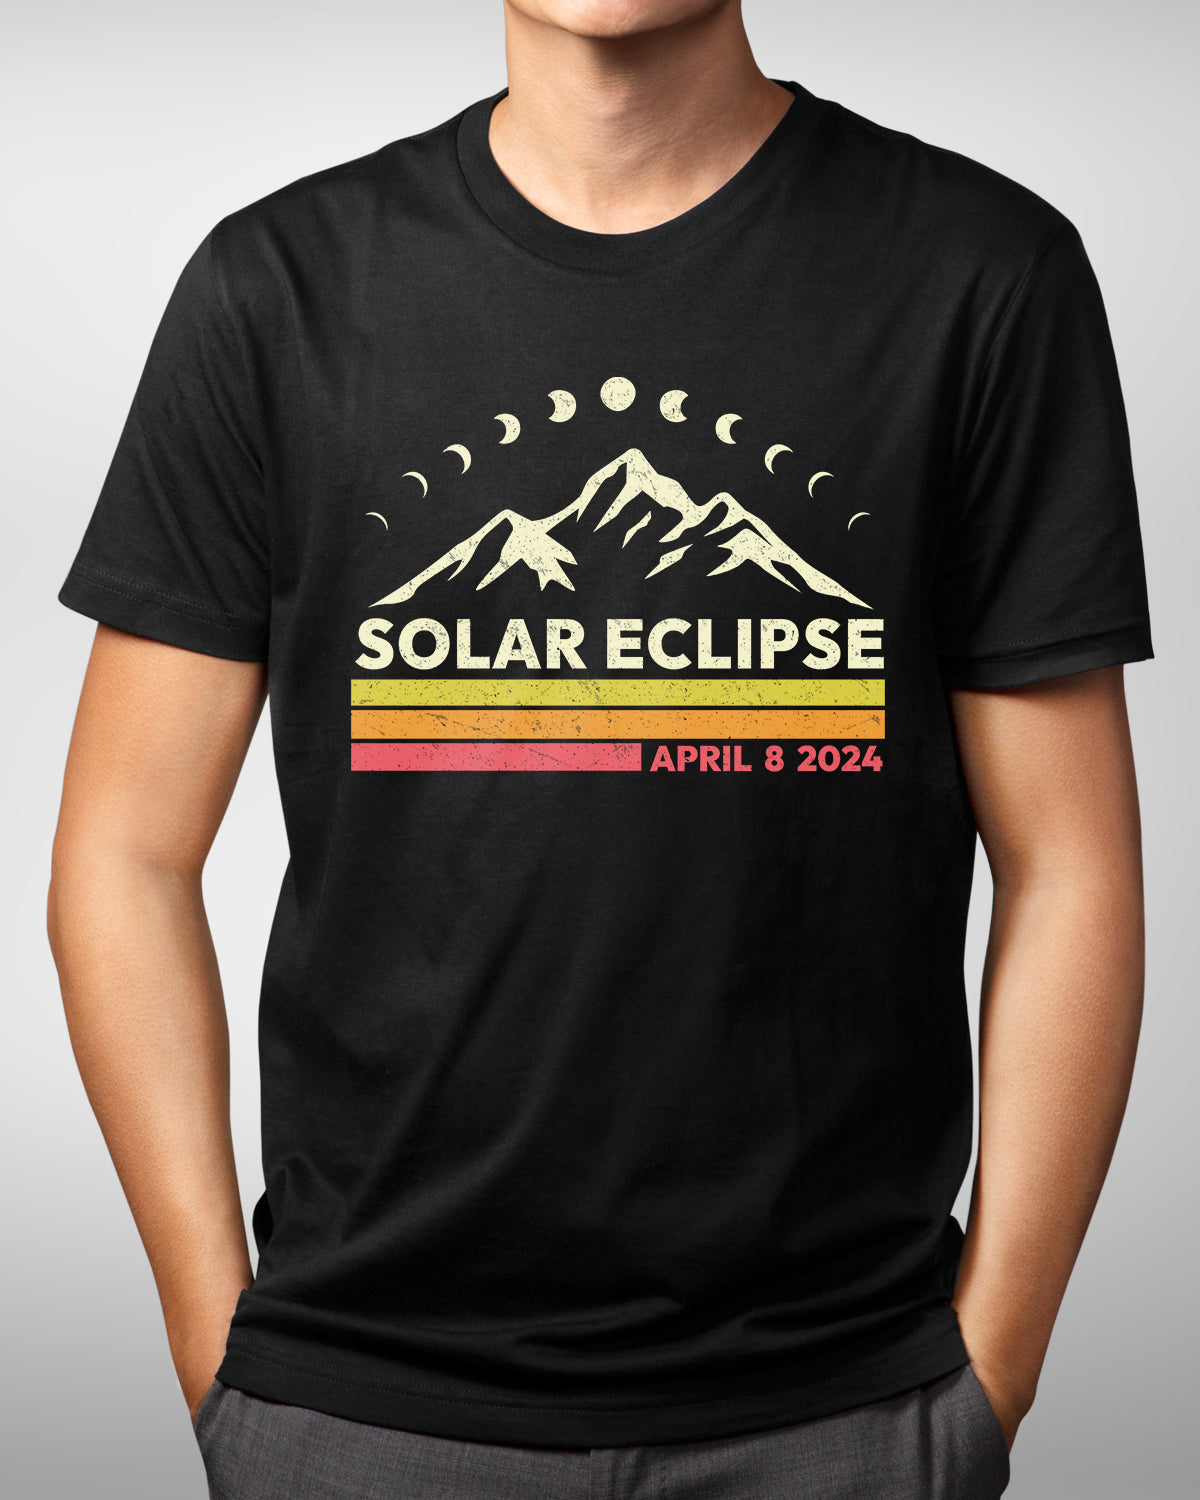 Total Solar Eclipse 2024 Shirt, Vintage Solar Eclipse Chaser Tee, Path of Totality Shirt, April 8 Eclipse Souvenir Gift, Eclipse Apparel